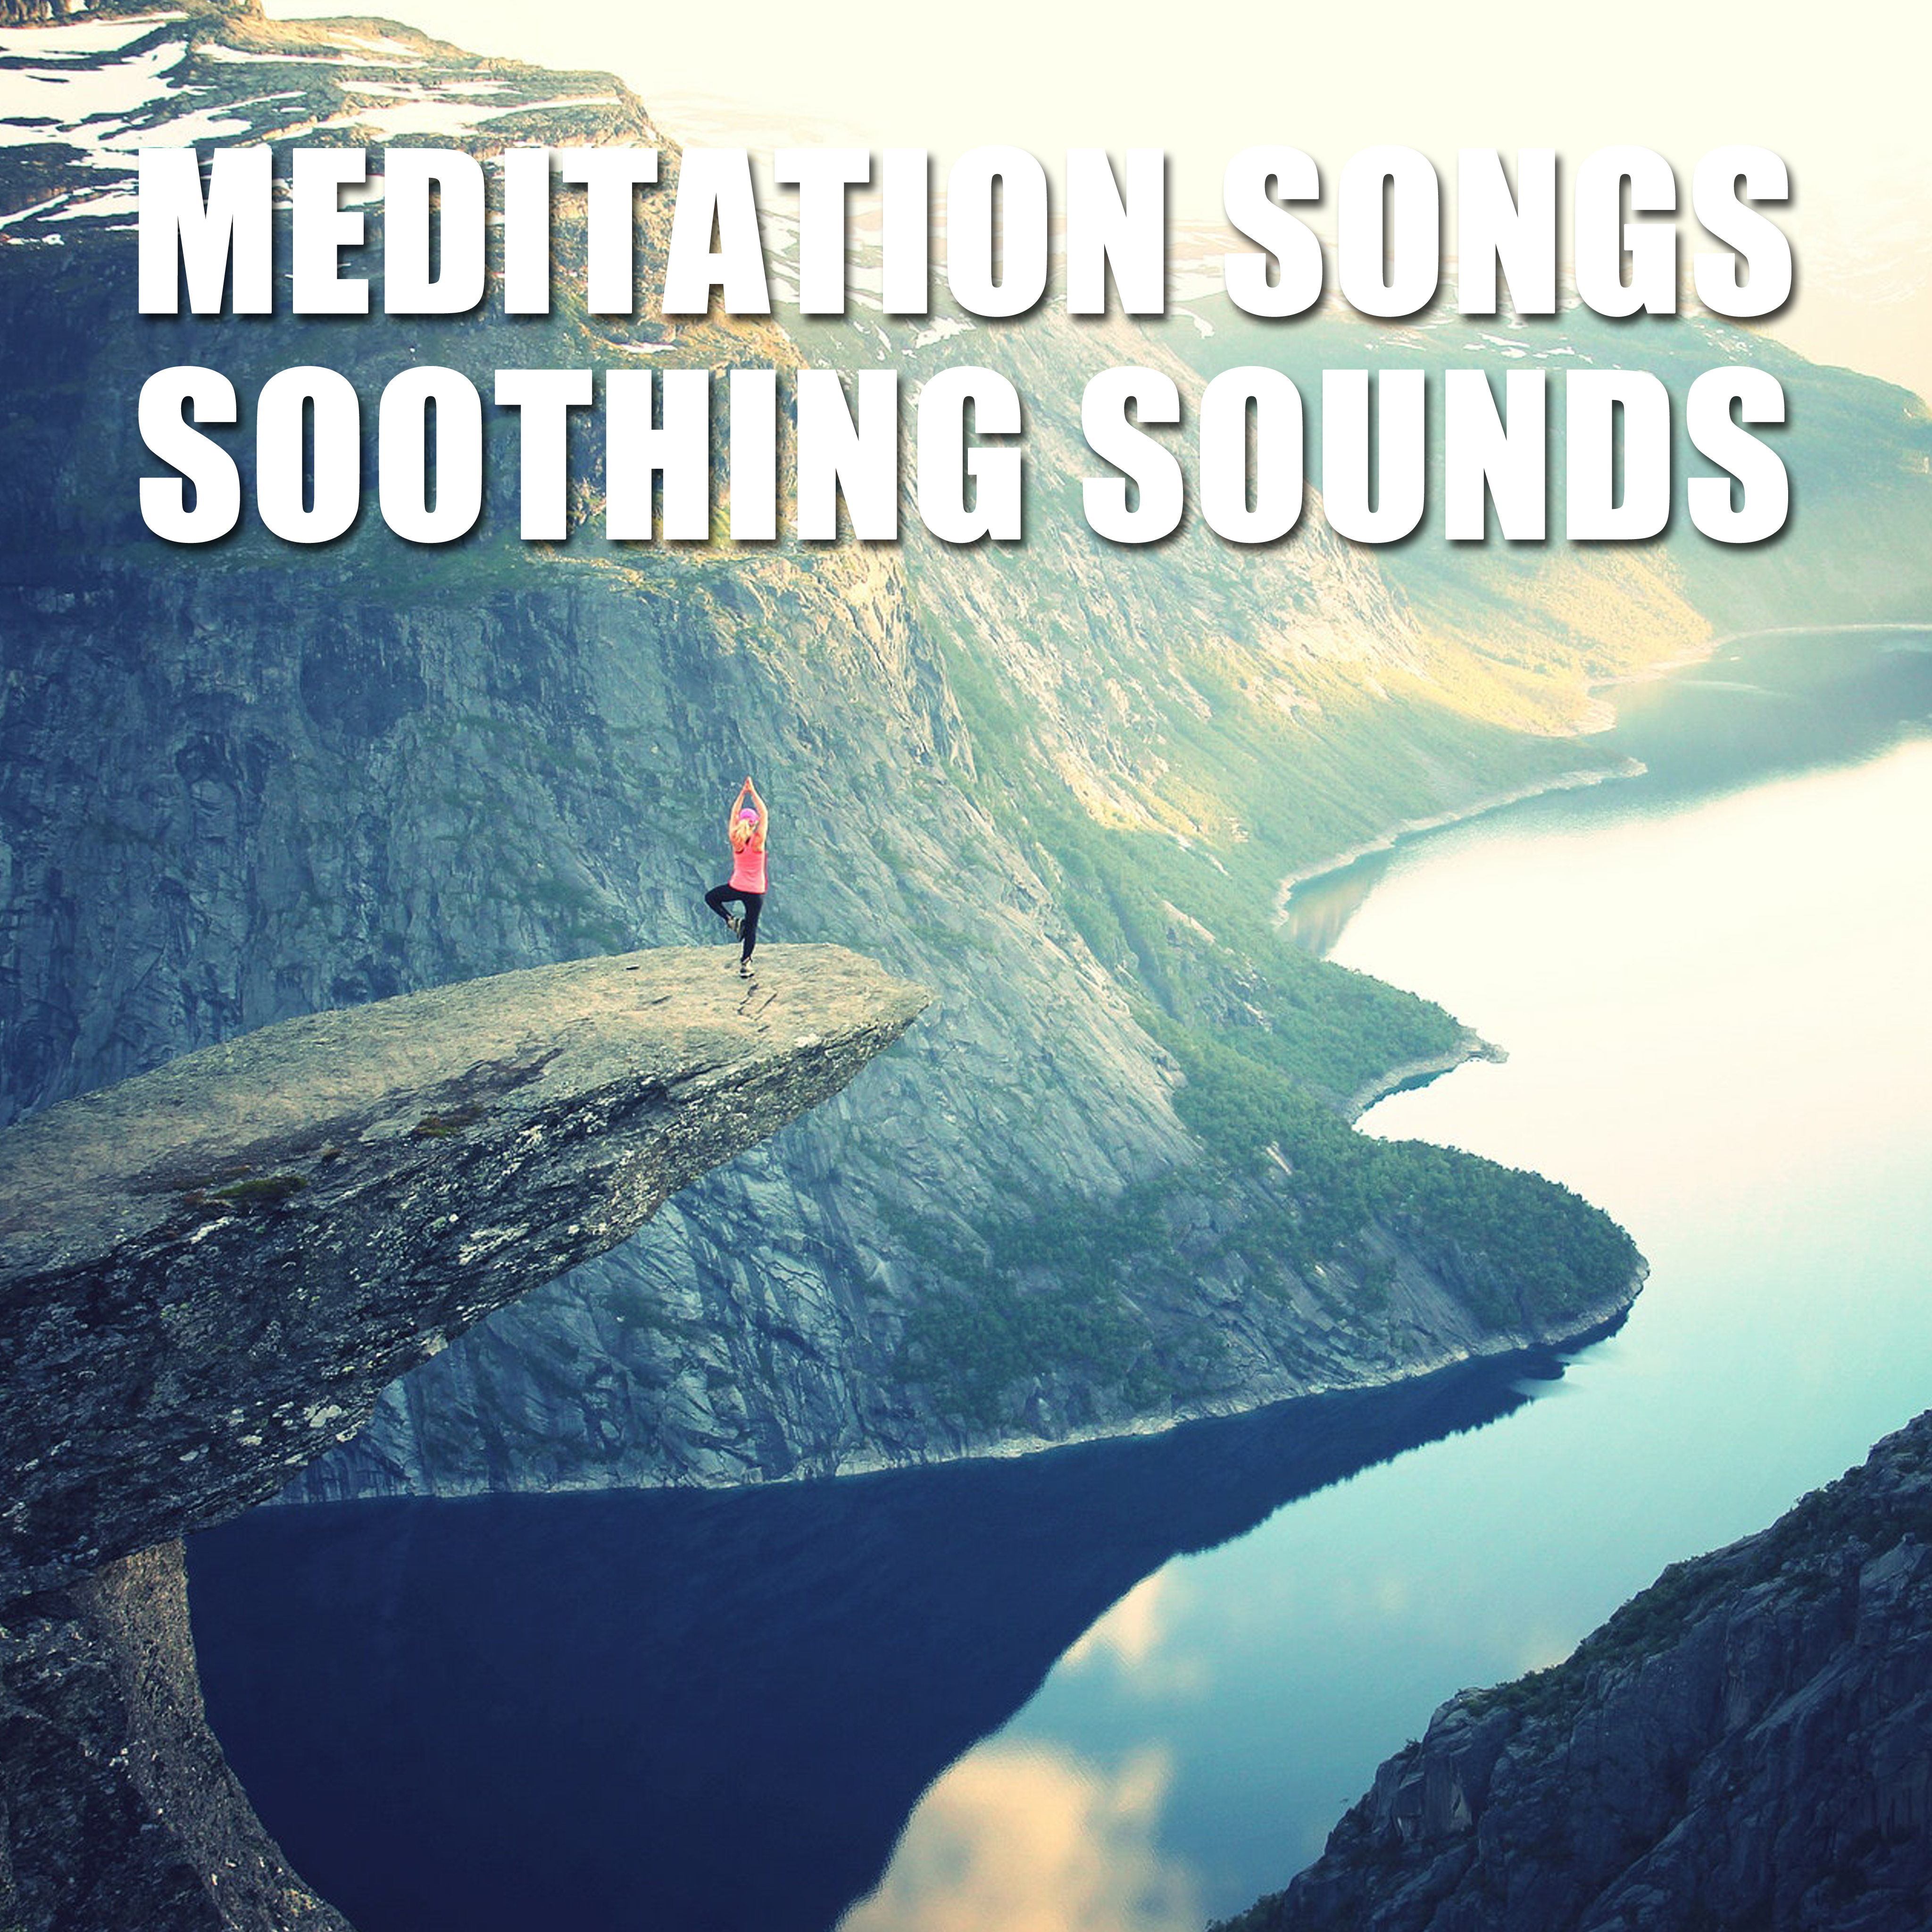 13 Meditation Songs - Soothing Sounds